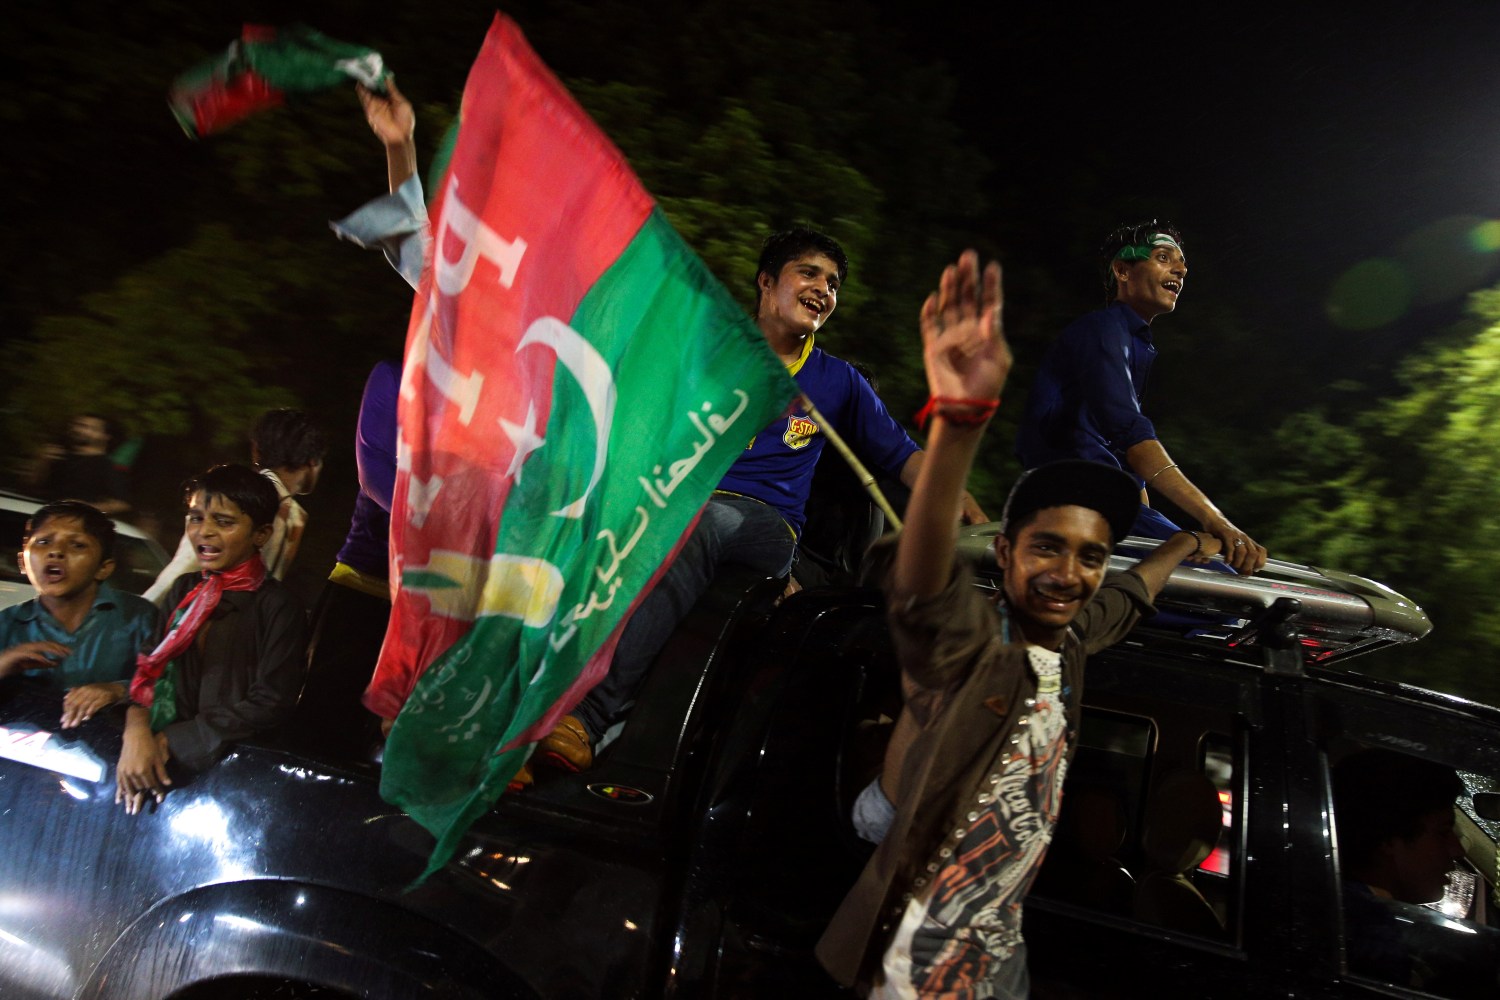 Supporters of Imran Khan, chairman of the Pakistan Tehreek-e-Insaf (PTI), political party celebrate during the general election in Islamabad, Pakistan, July 26, 2018. REUTERS/Athit Perawongmetha - RC1F05E92740